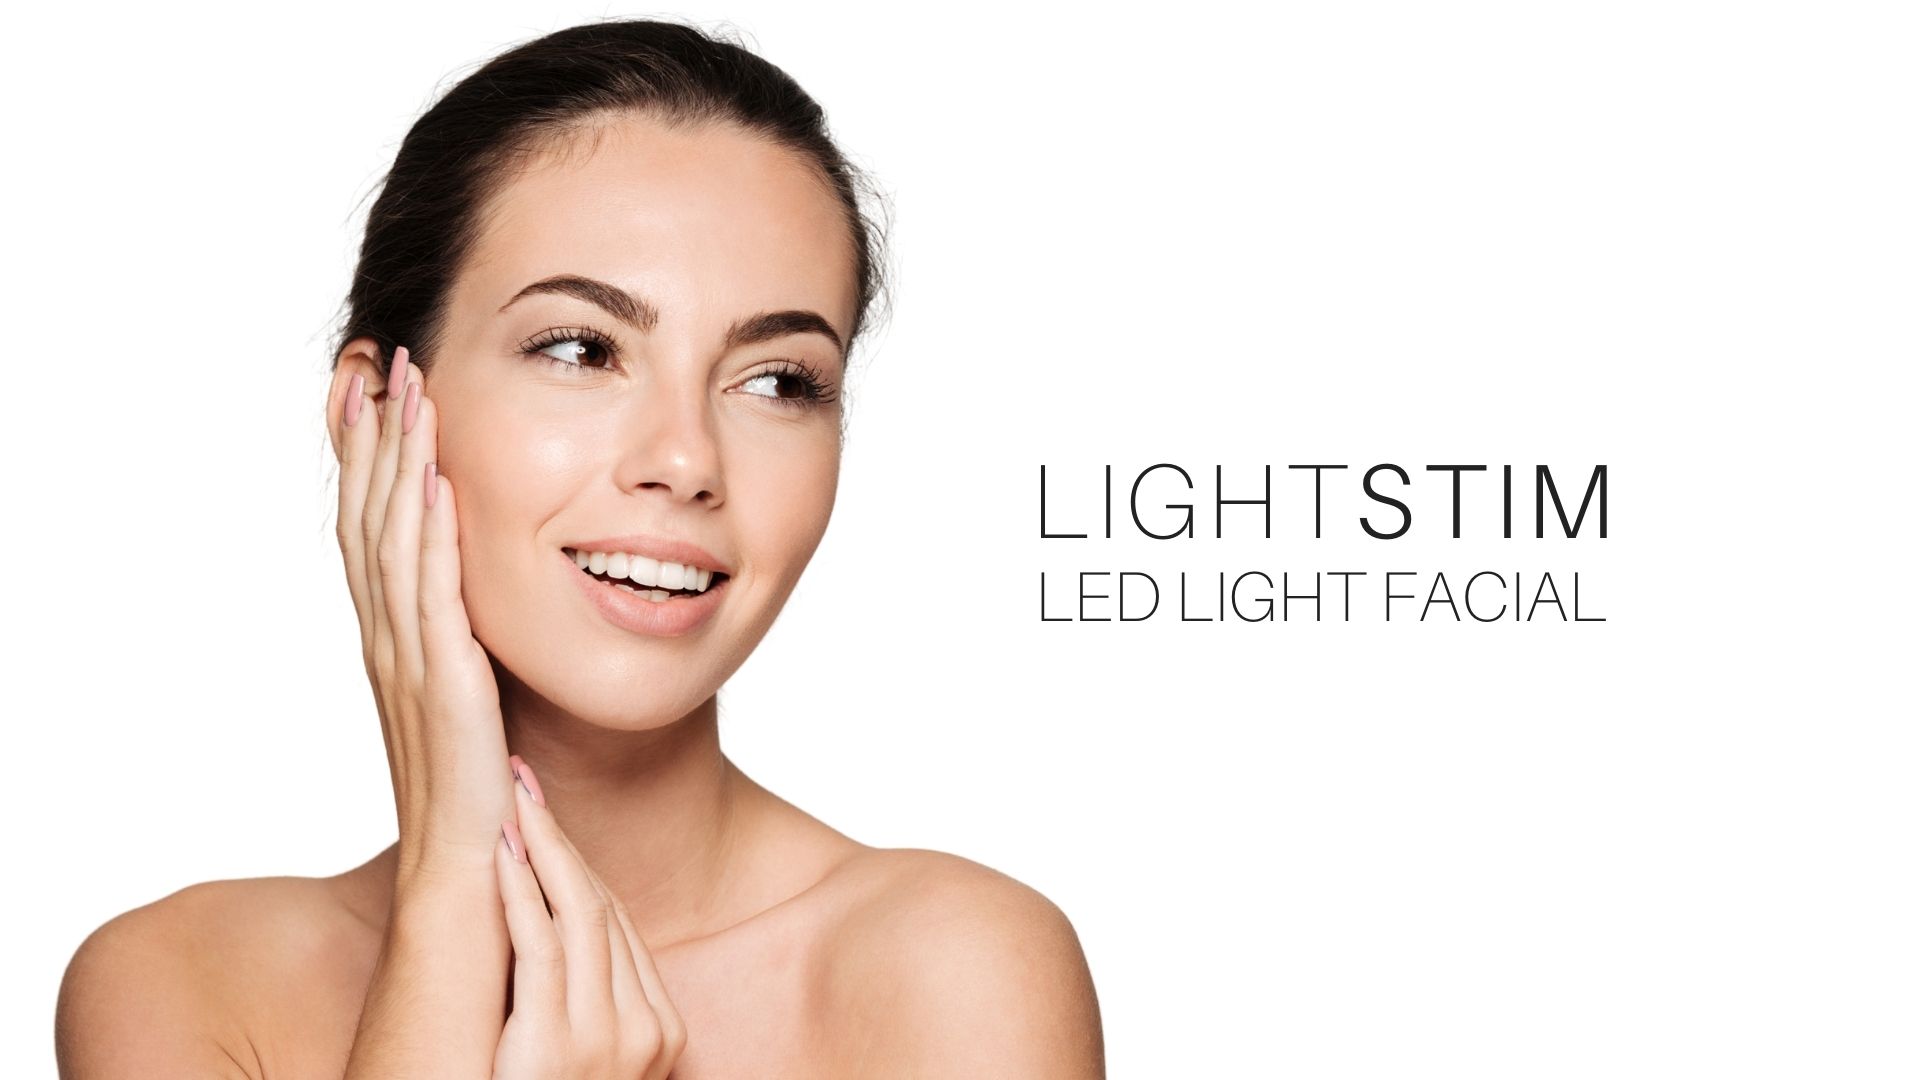 attractive young woman with clear skin promoting lightstim led light facial